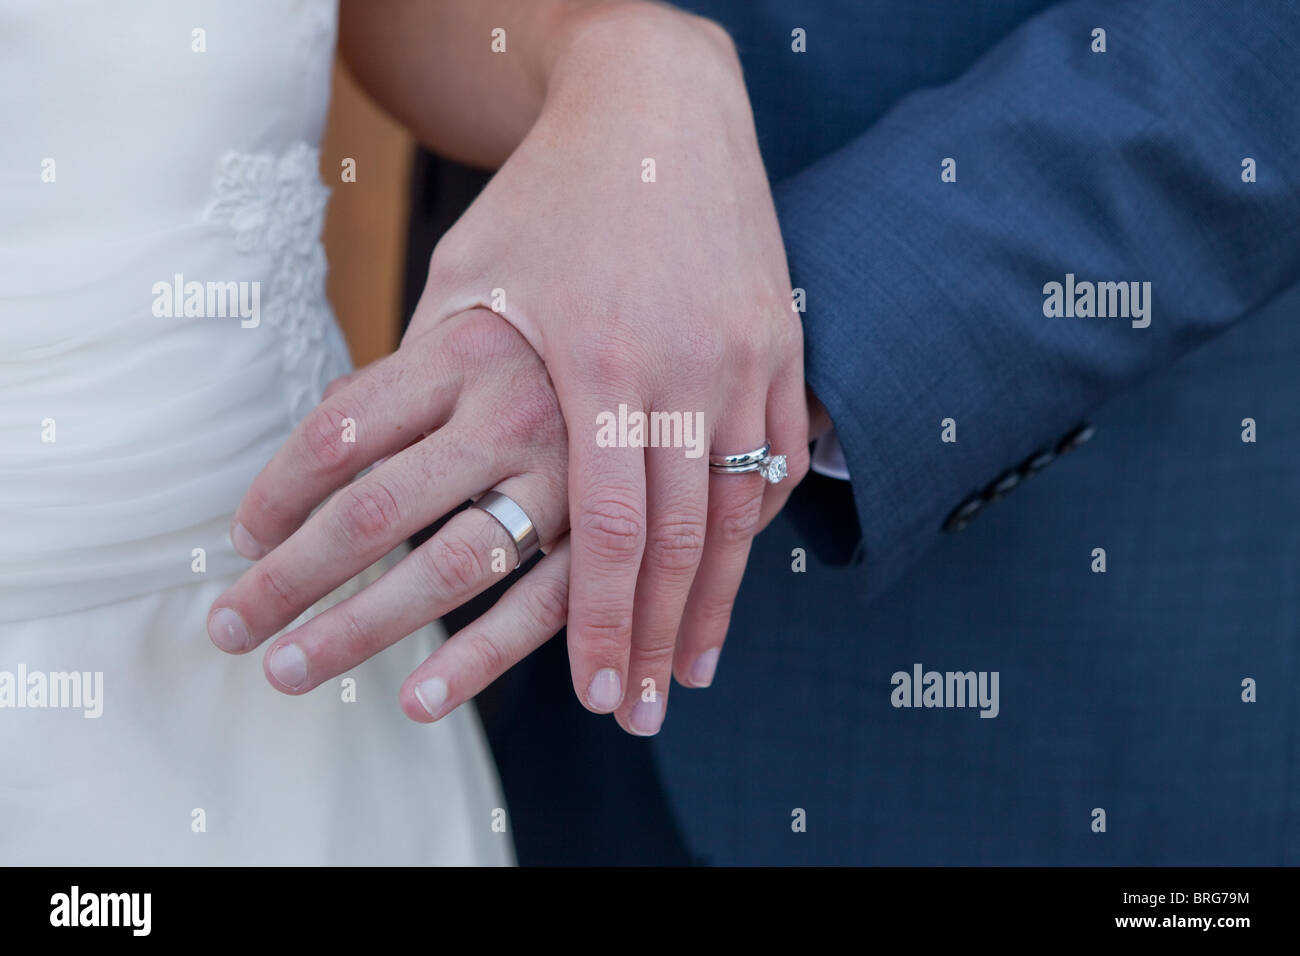 Closeup of newlyweds holding hands with wedding rings visible. Stock Photo